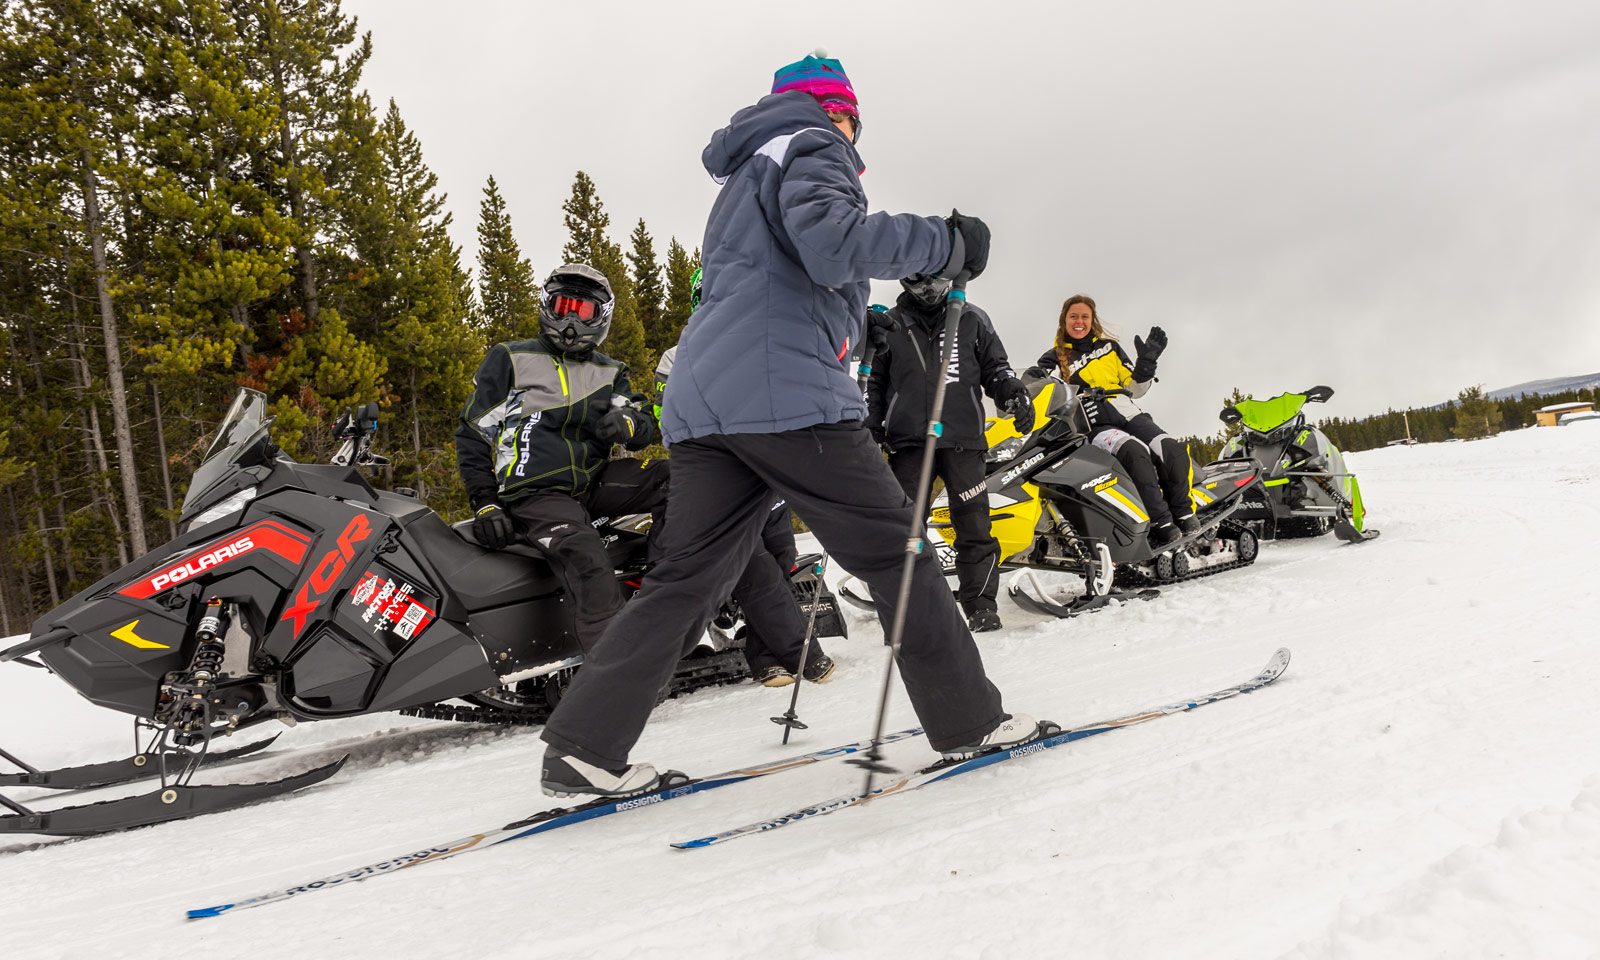 Snowmobilers encountering a cross-country skier